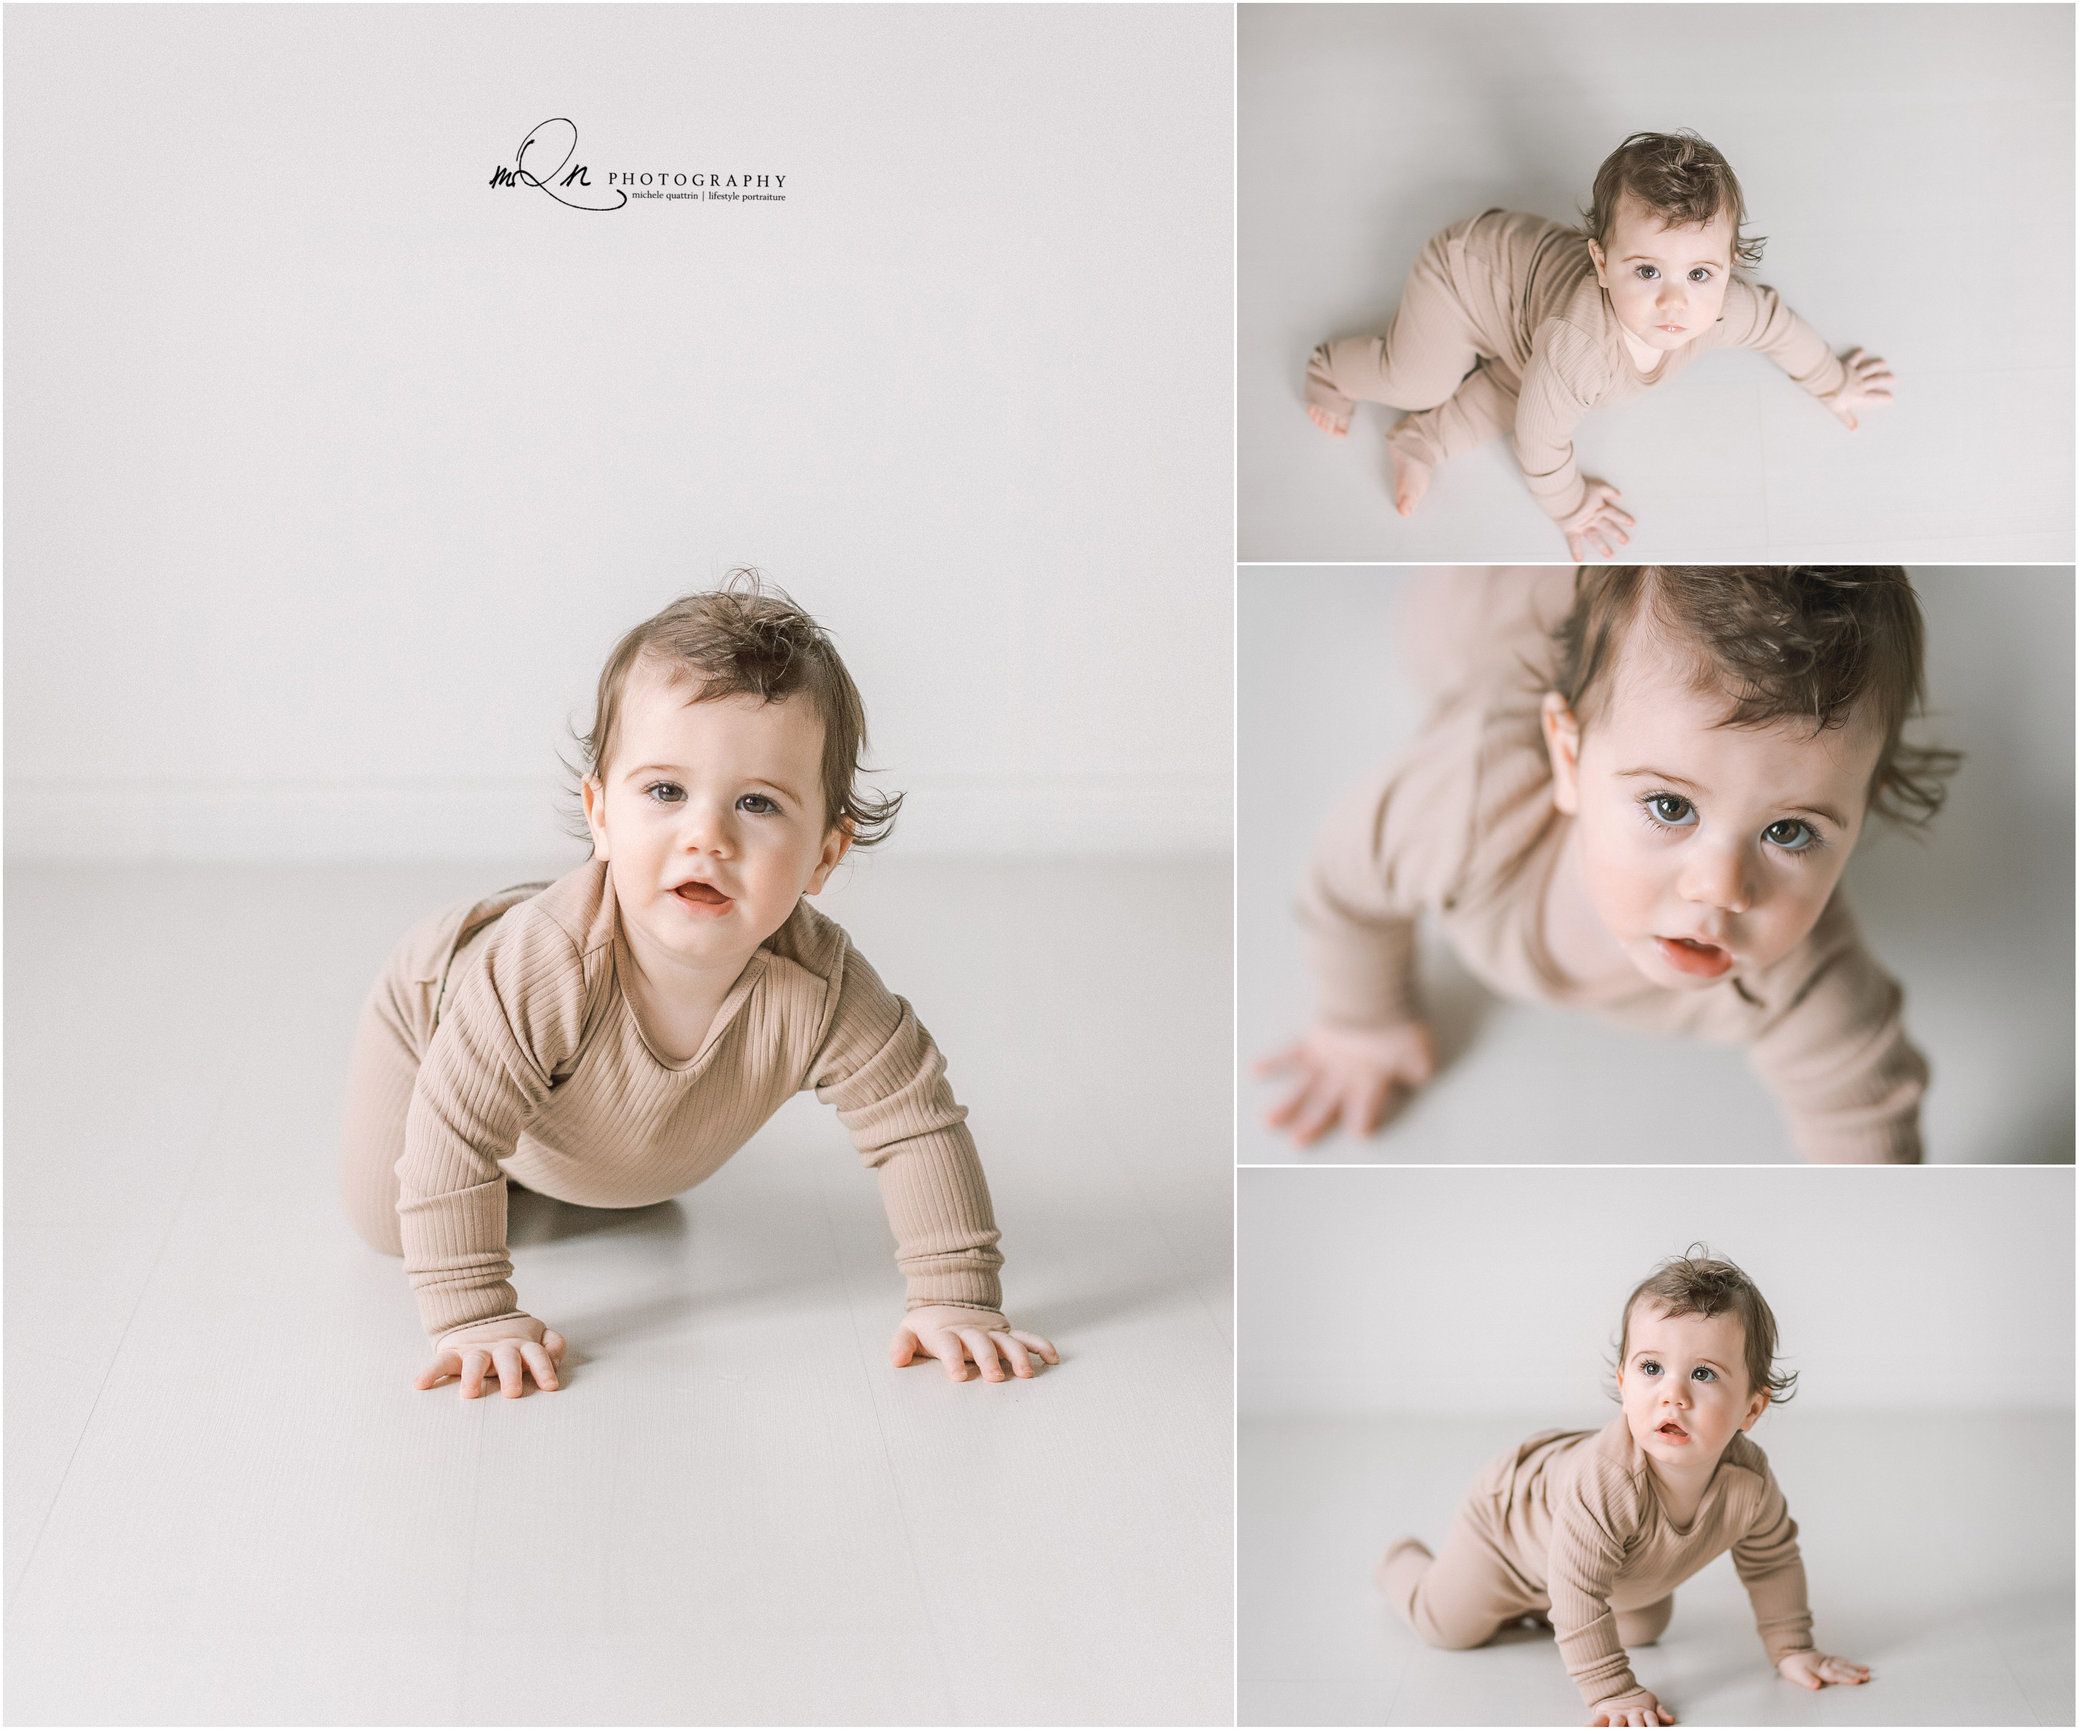 12 essential tips and tricks for photographing children | Photocrowd  Photography Blog